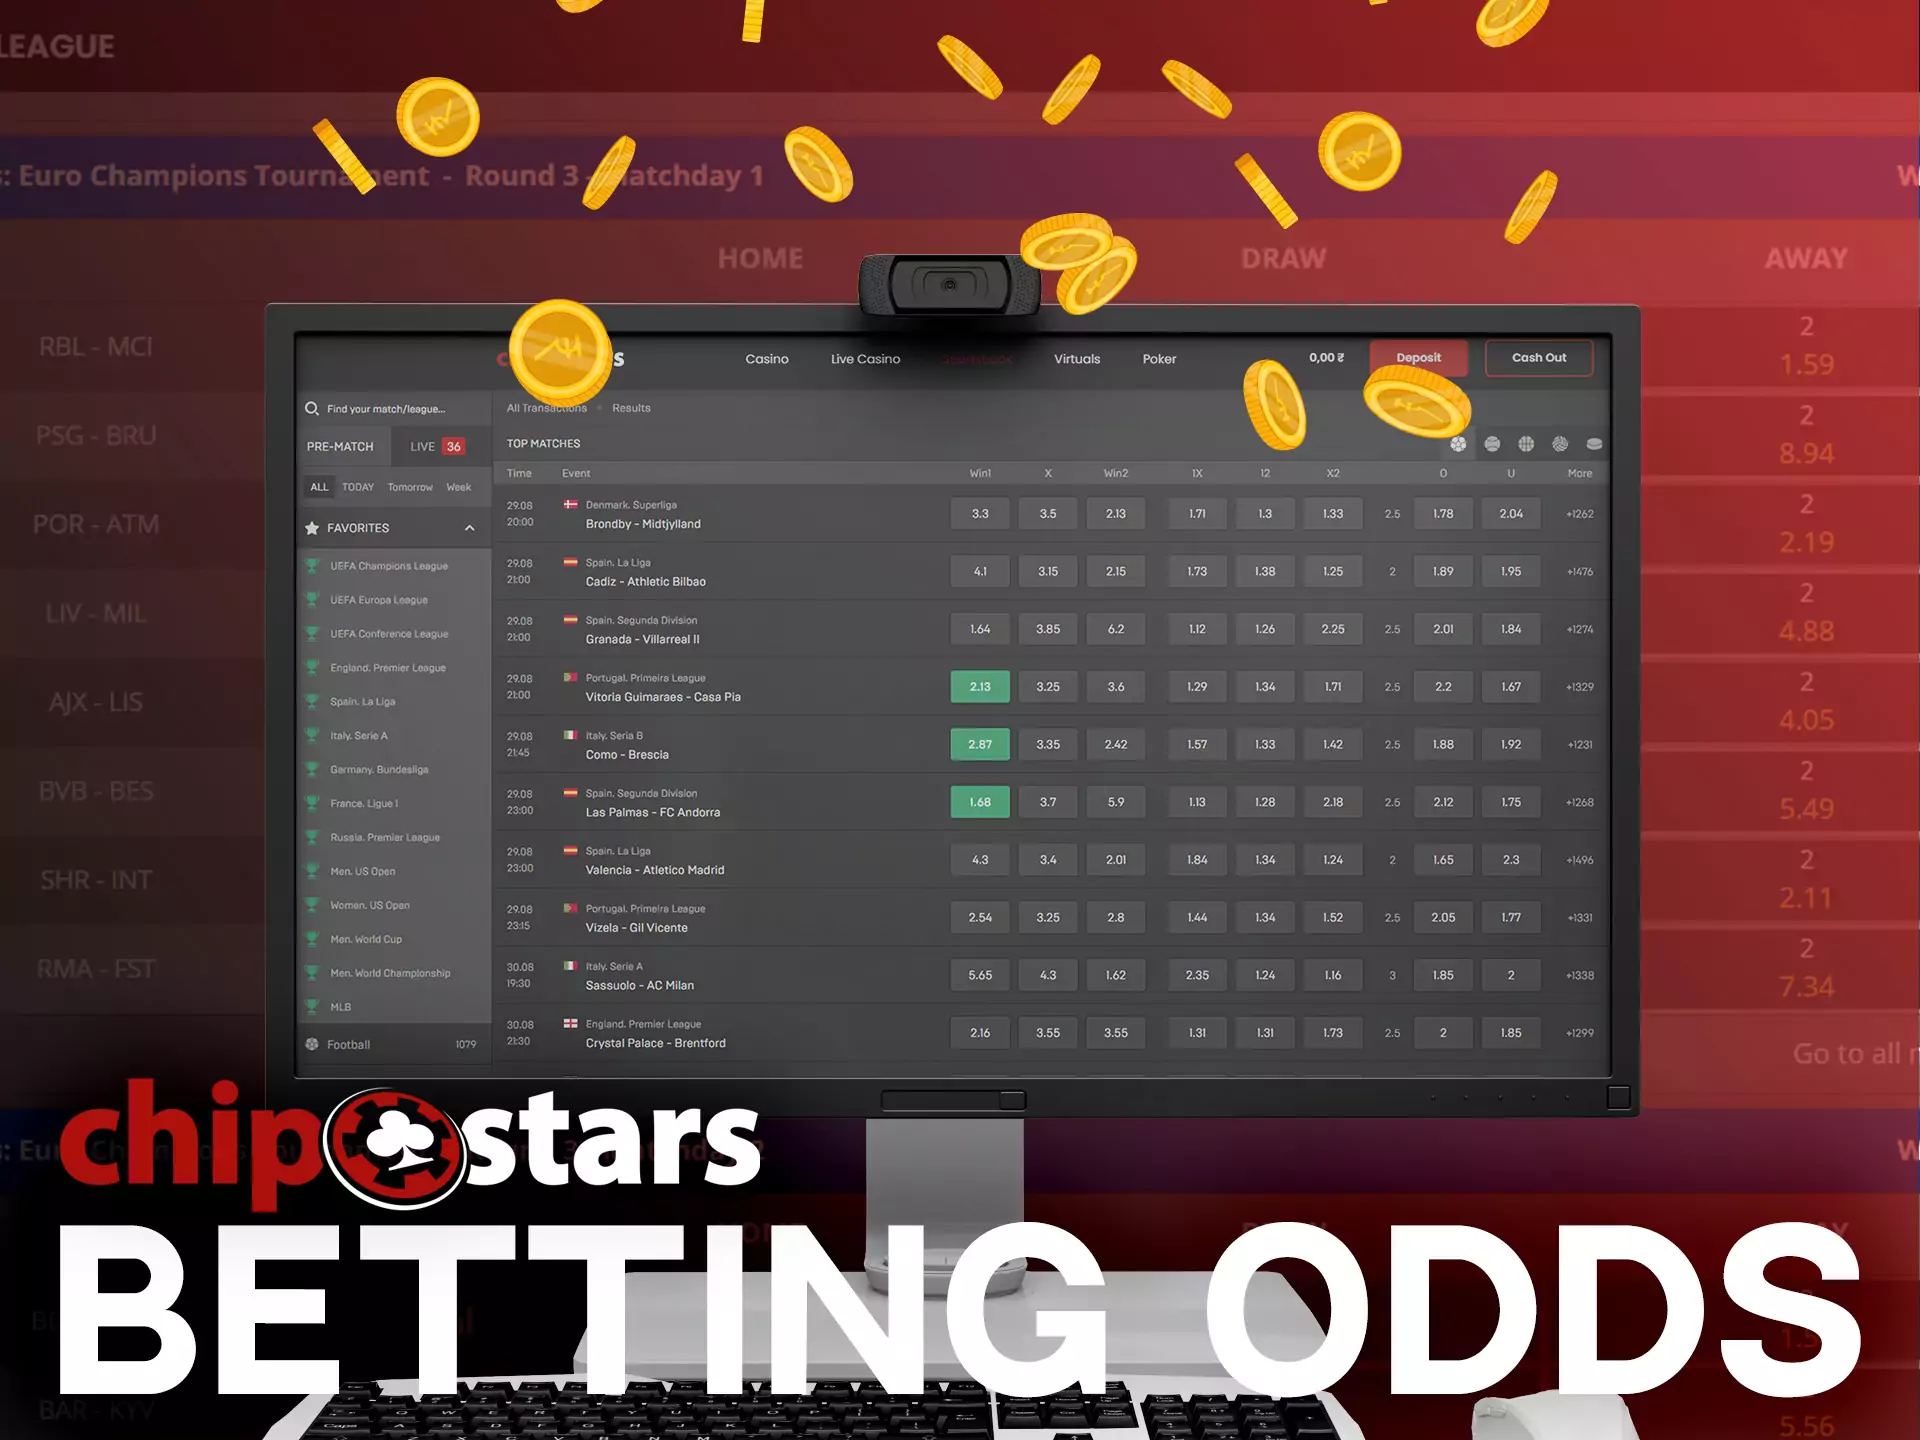 Odds influence profit from betting on Chipstars.